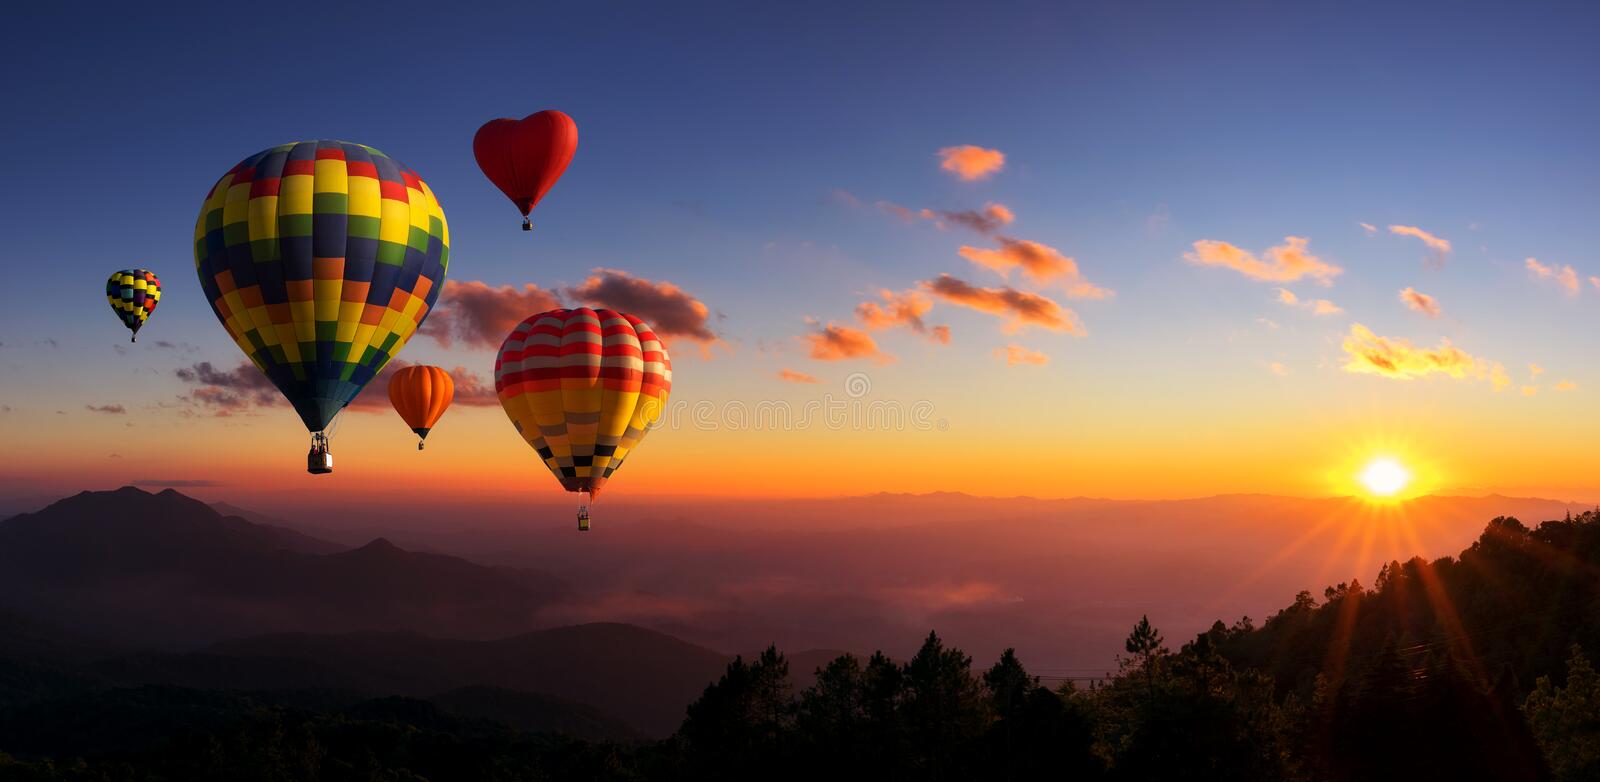 Hot Air Balloon Rides Over Scenic Landscapes - Your Next Unforgettable Experience